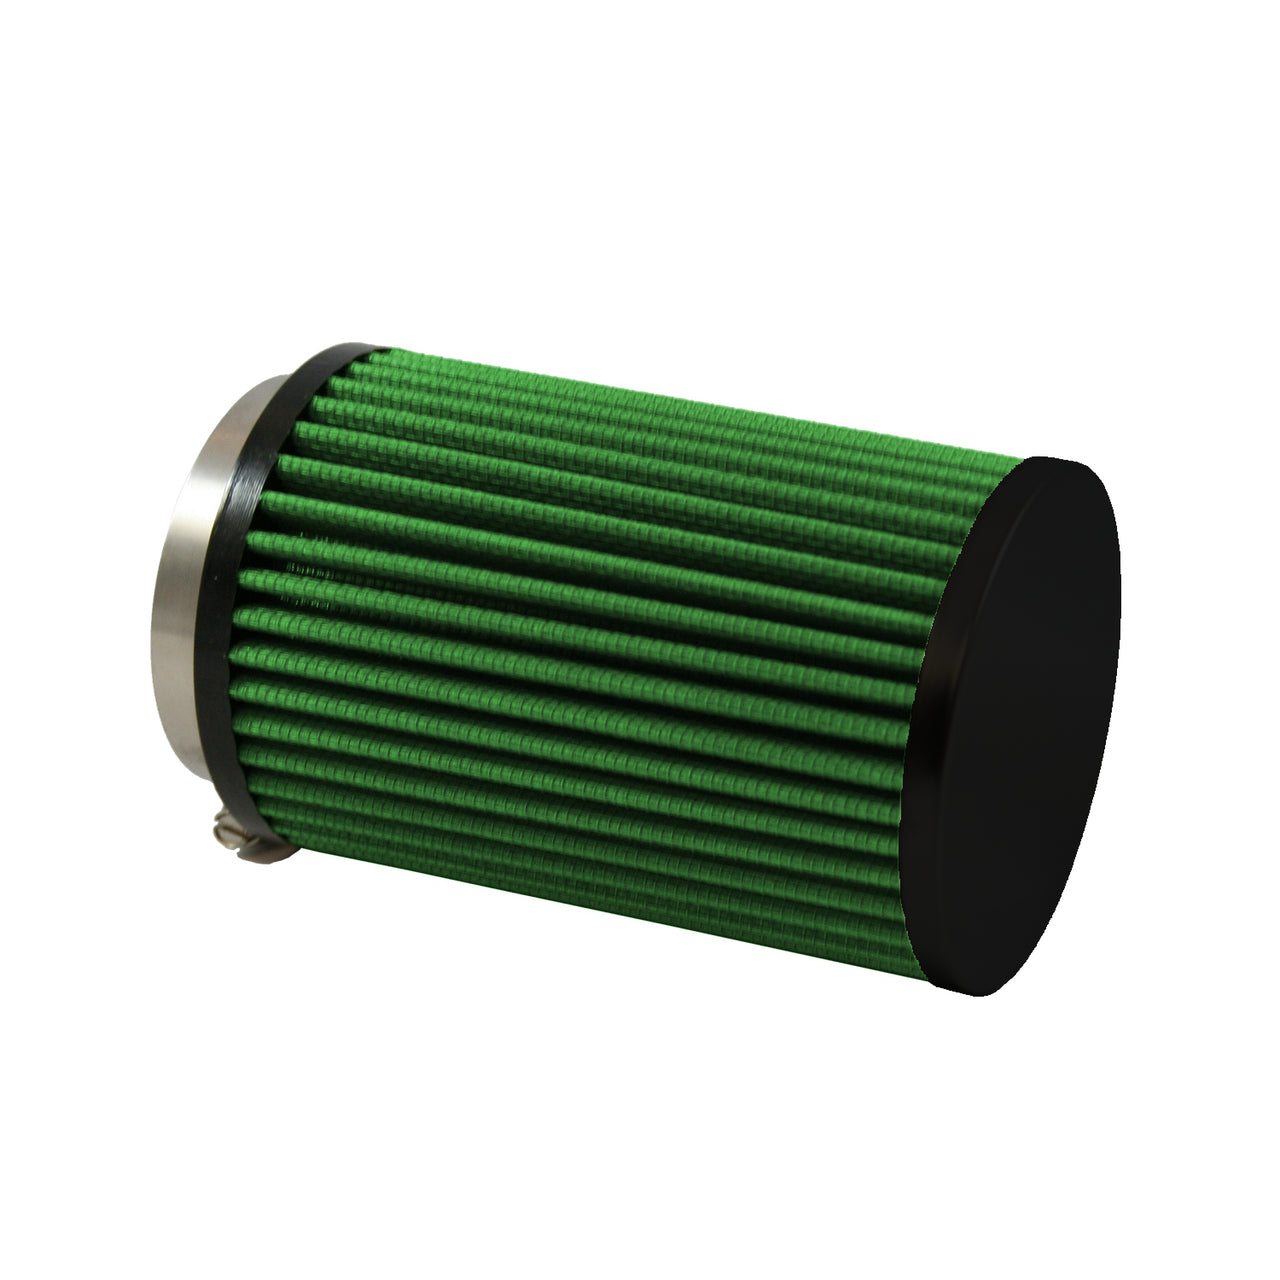 Green Filter Clamp-on Filter ID 2.5in. / H 6in.